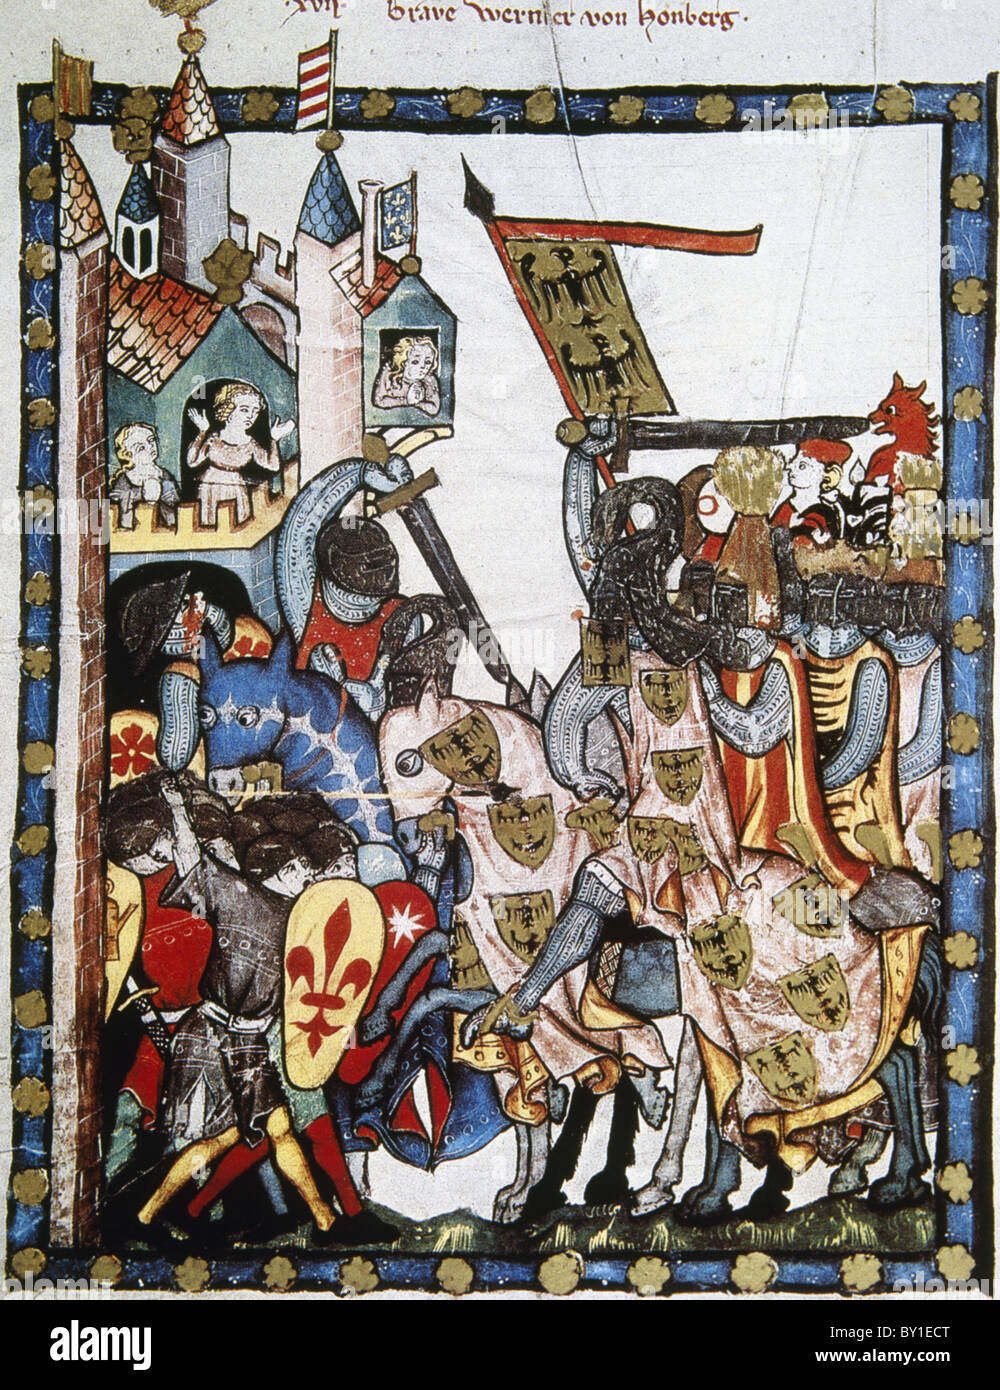 Werner Graf von Homberg (1284-1320) besieges a city defended by the troops of the Anjou from Sicily. Codex Manesse. Stock Photo